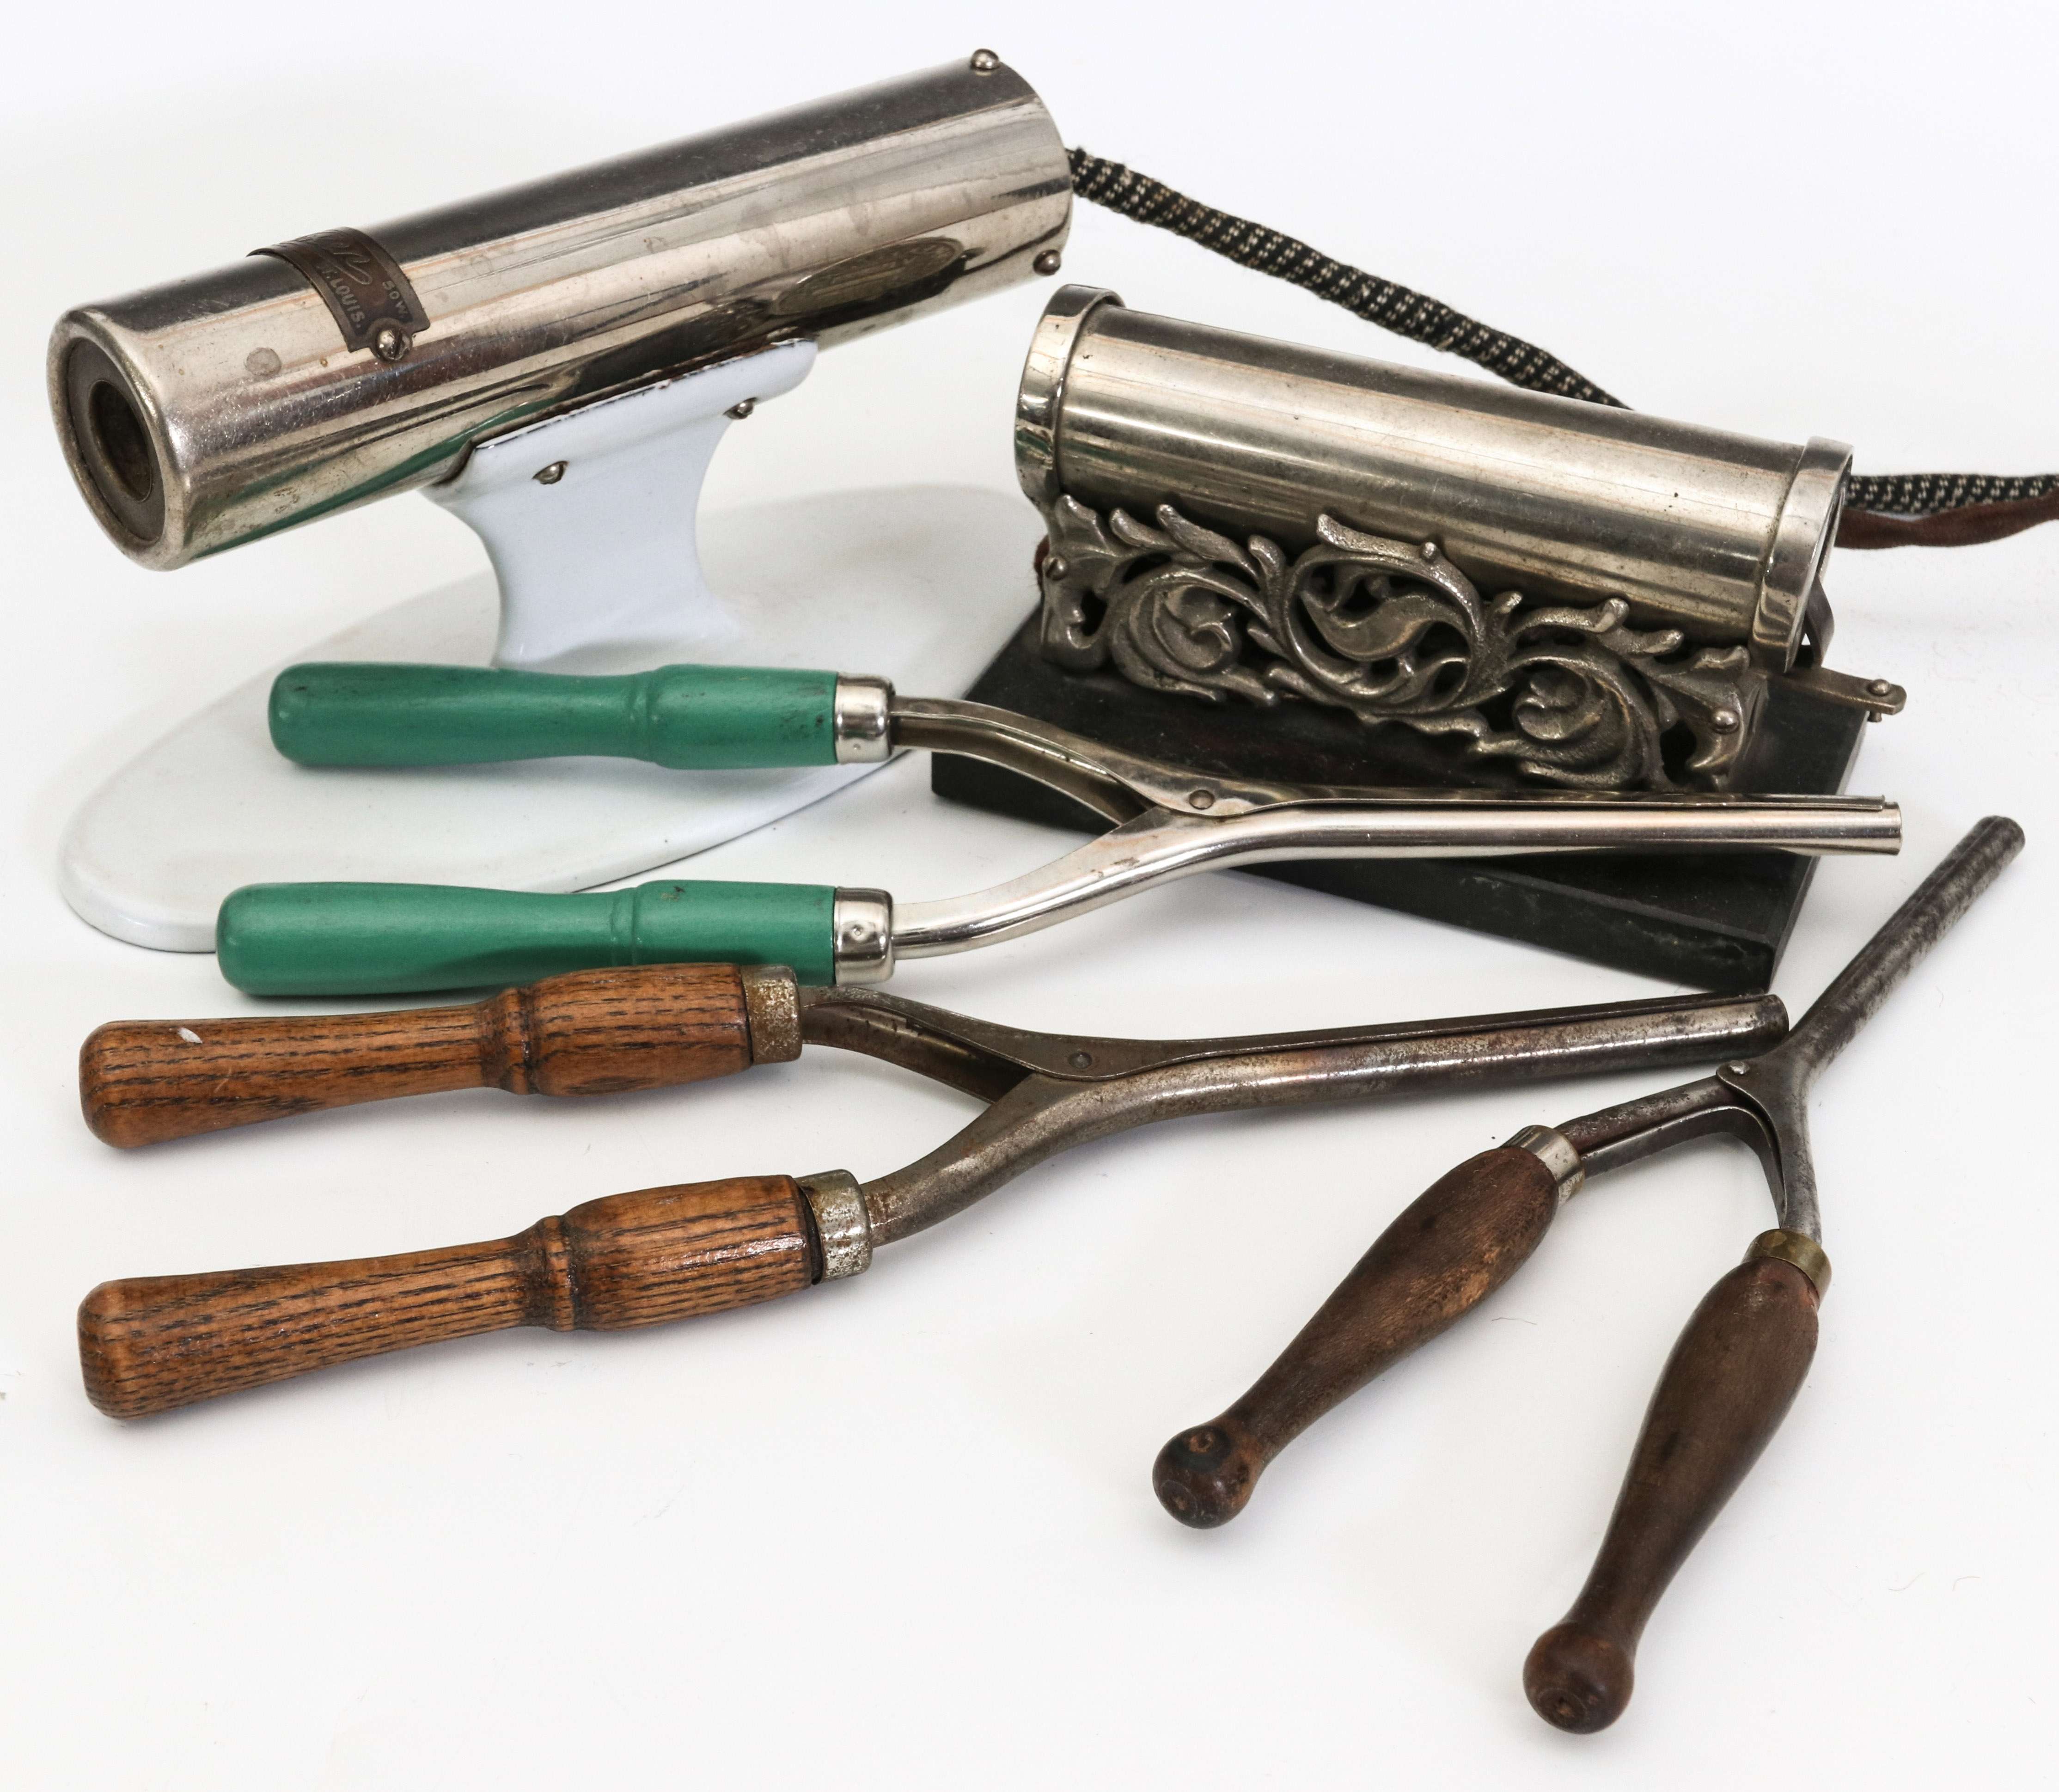 TWO UNUSUAL EARLY 20TH CENT CURLING IRON HEATERS